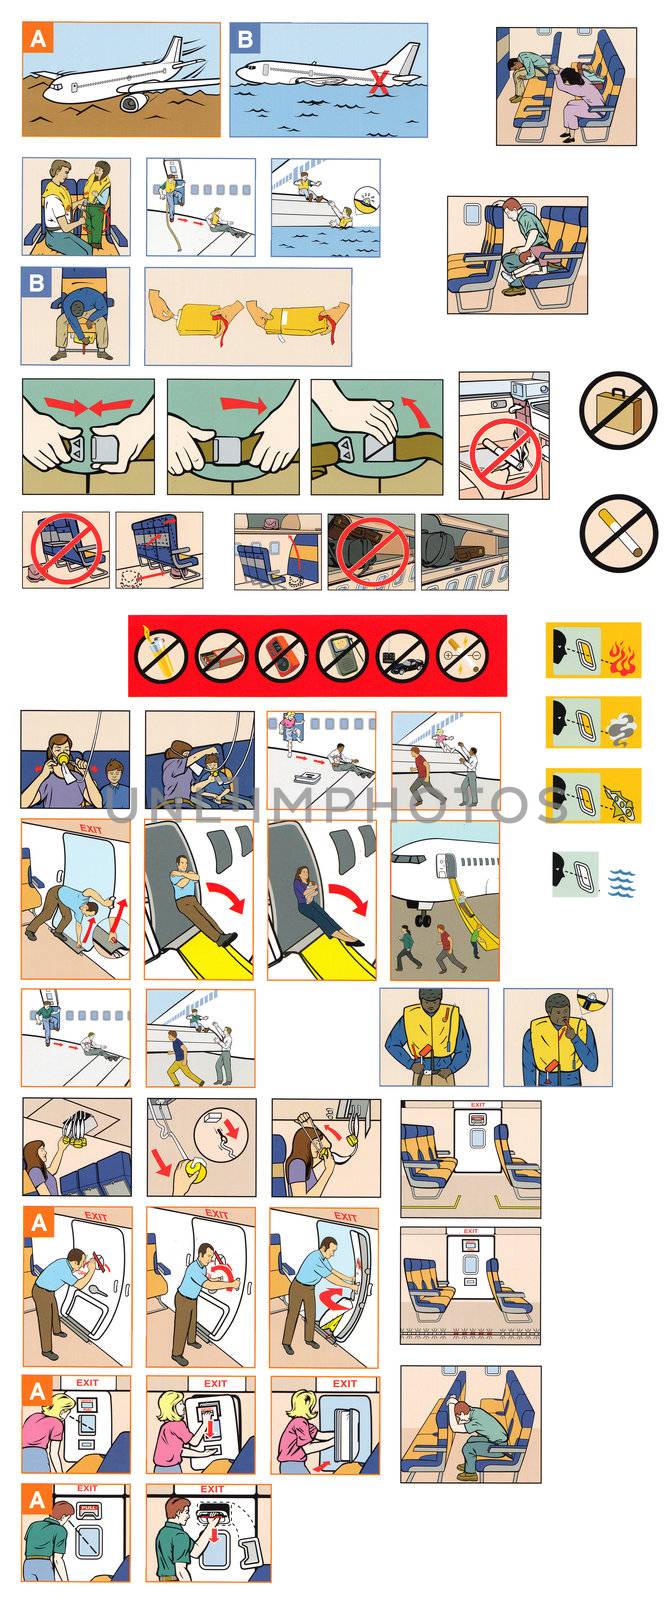 Plane crash evacuation how to chart by jeremywhat